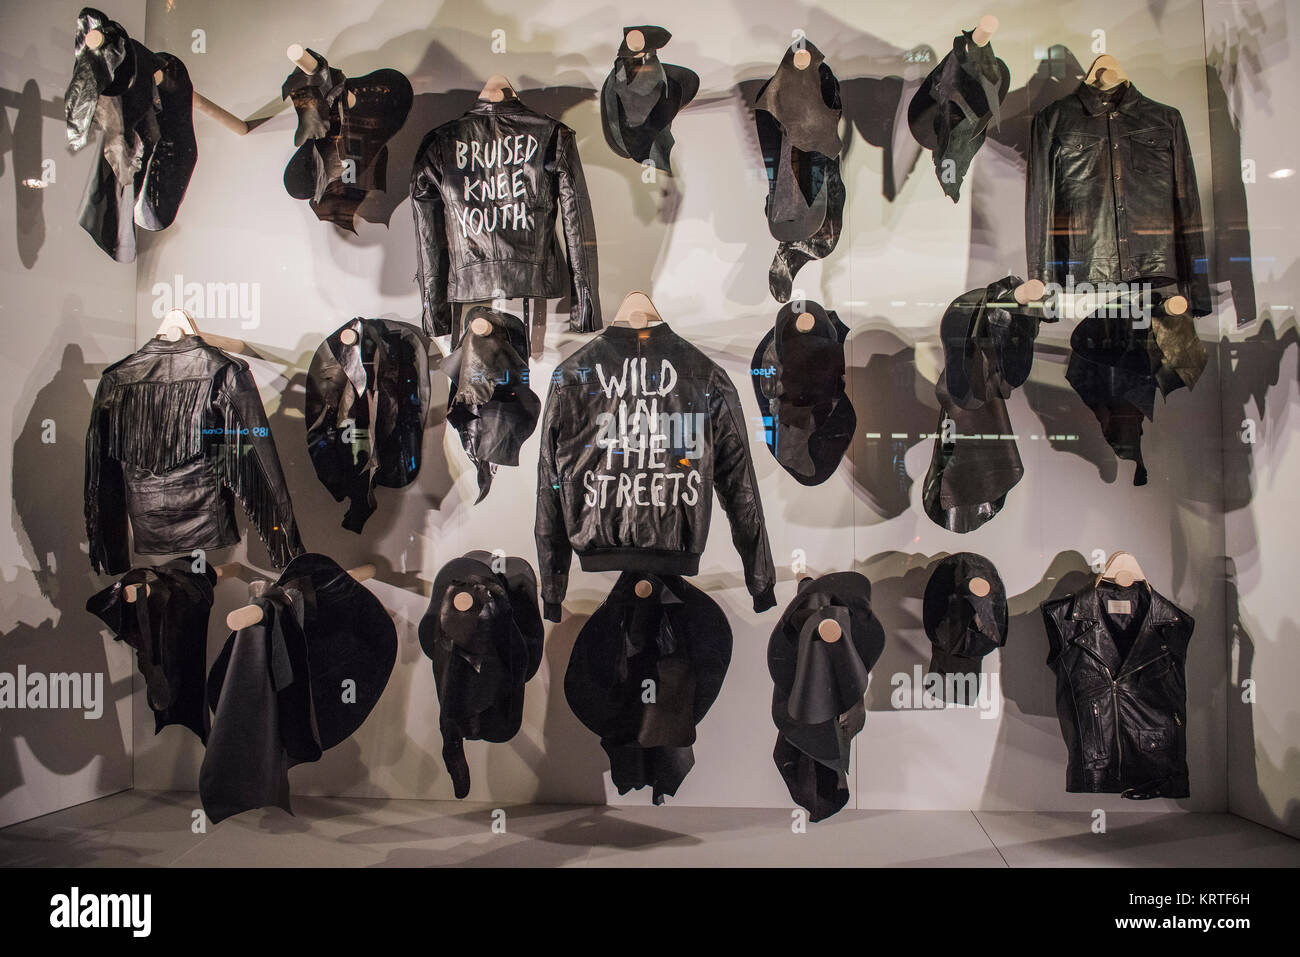 London, UK - February 19, 2017: Leather jackets in a clothing shop in London, on famous Oxford Street. Stock Photo